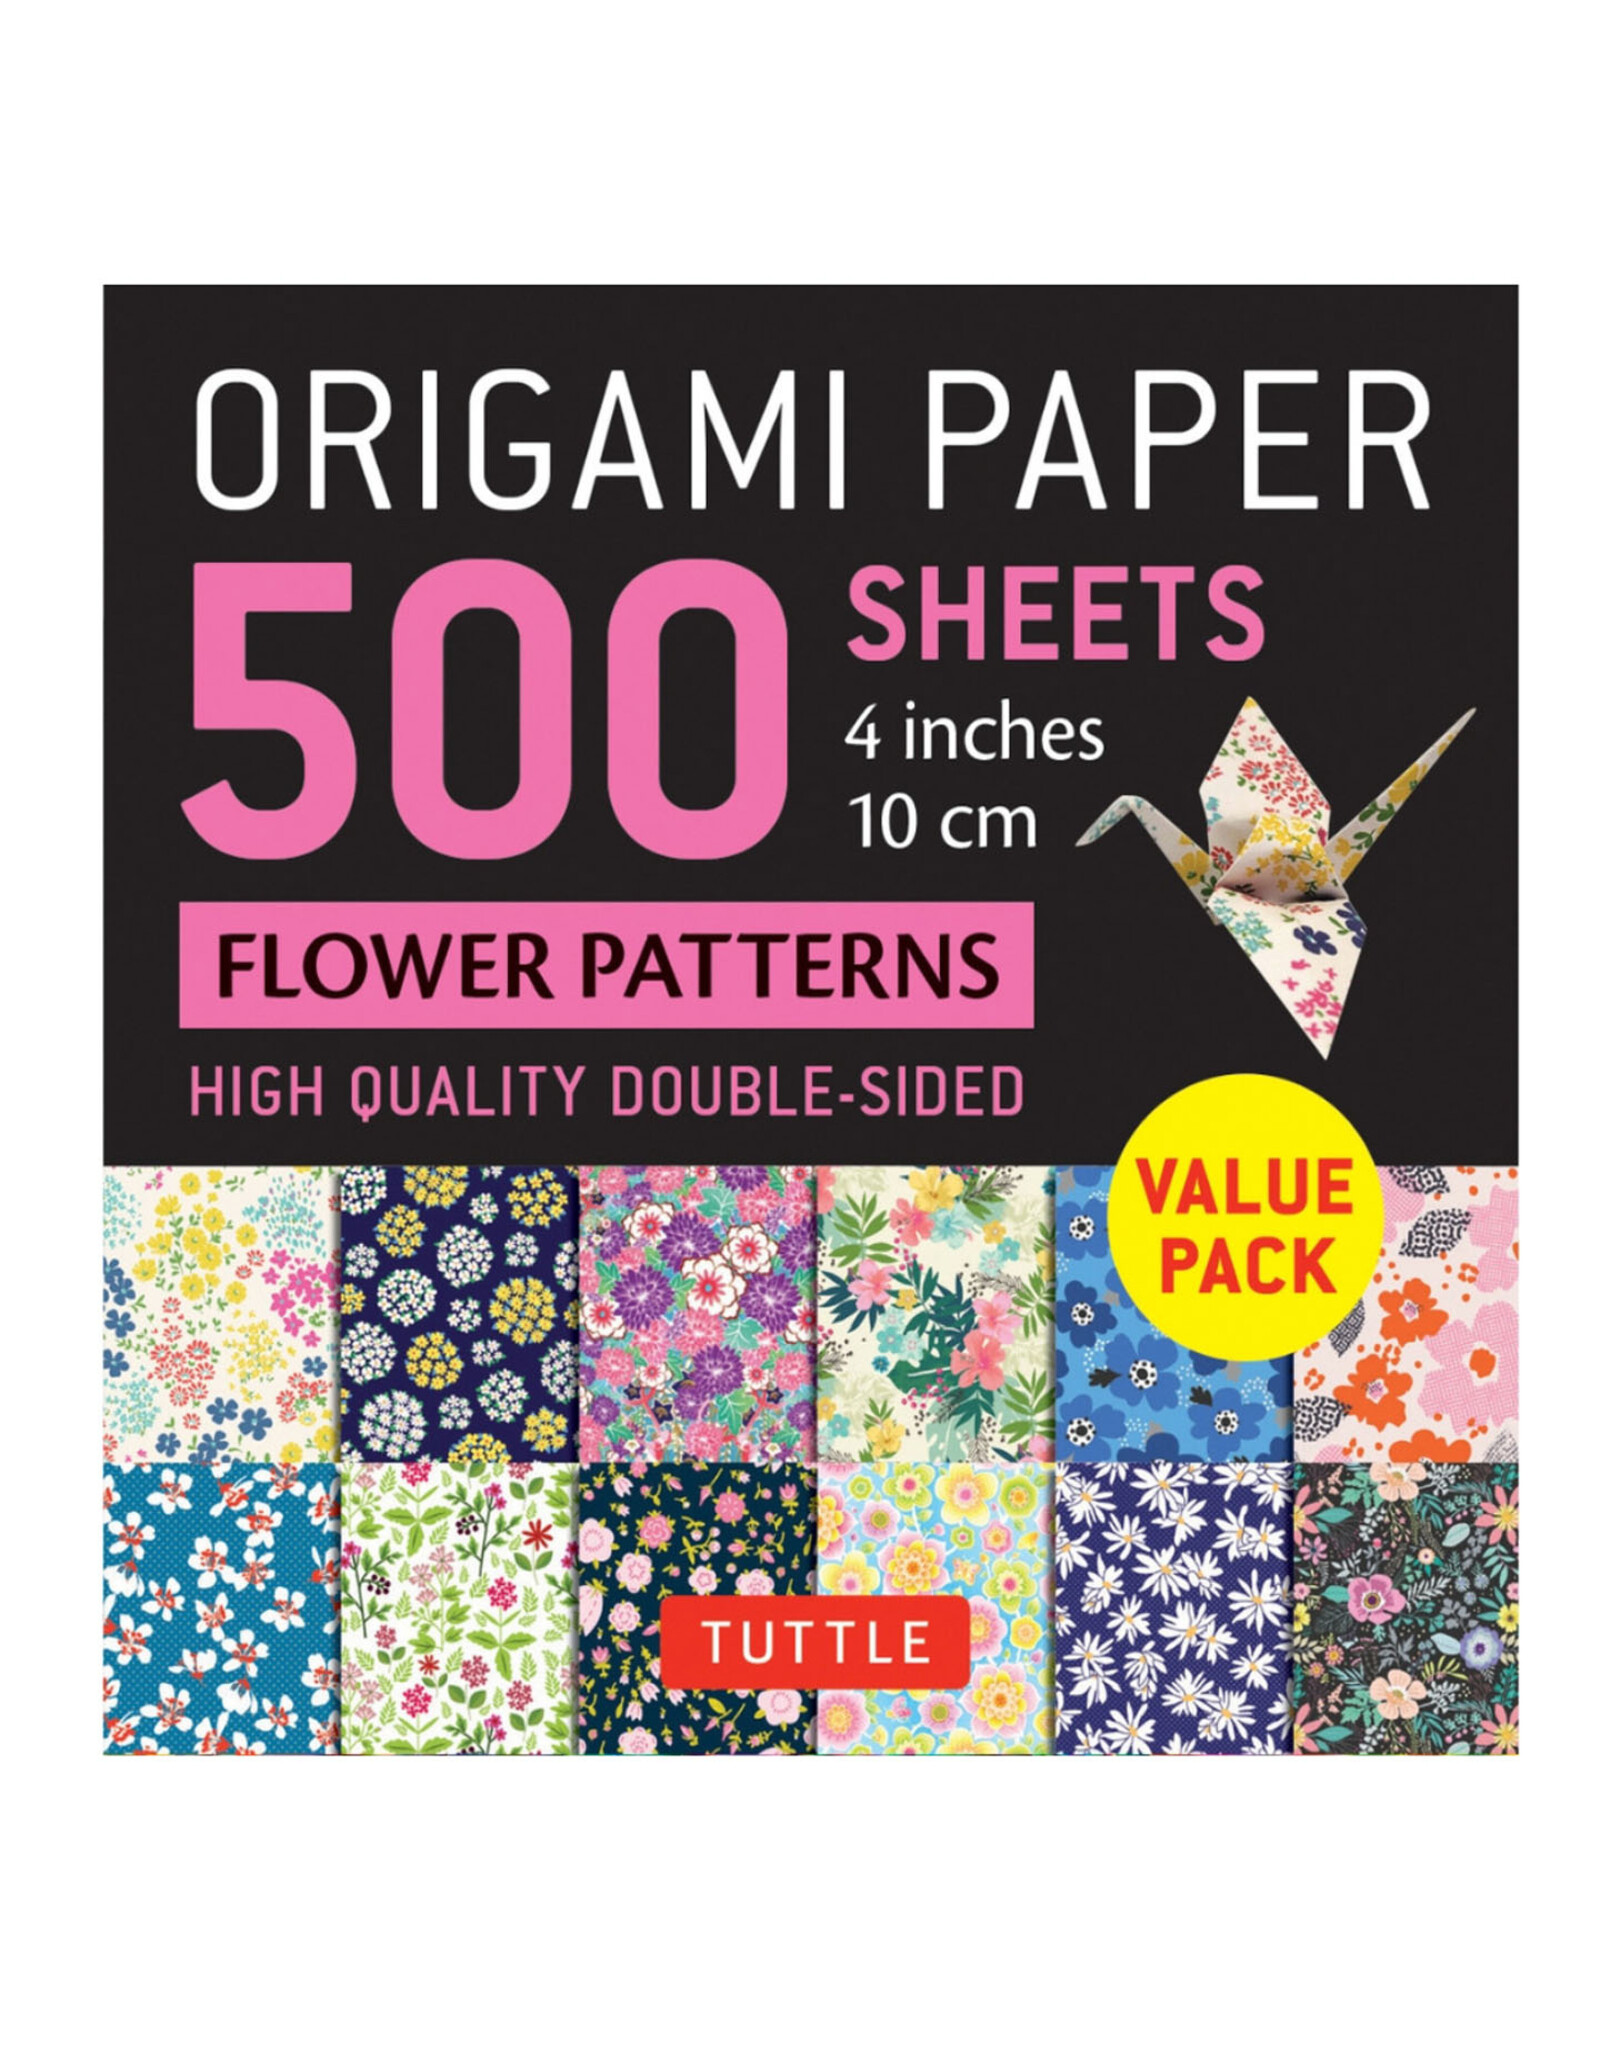 Origami Paper - 500 Flower Patterns Sheets